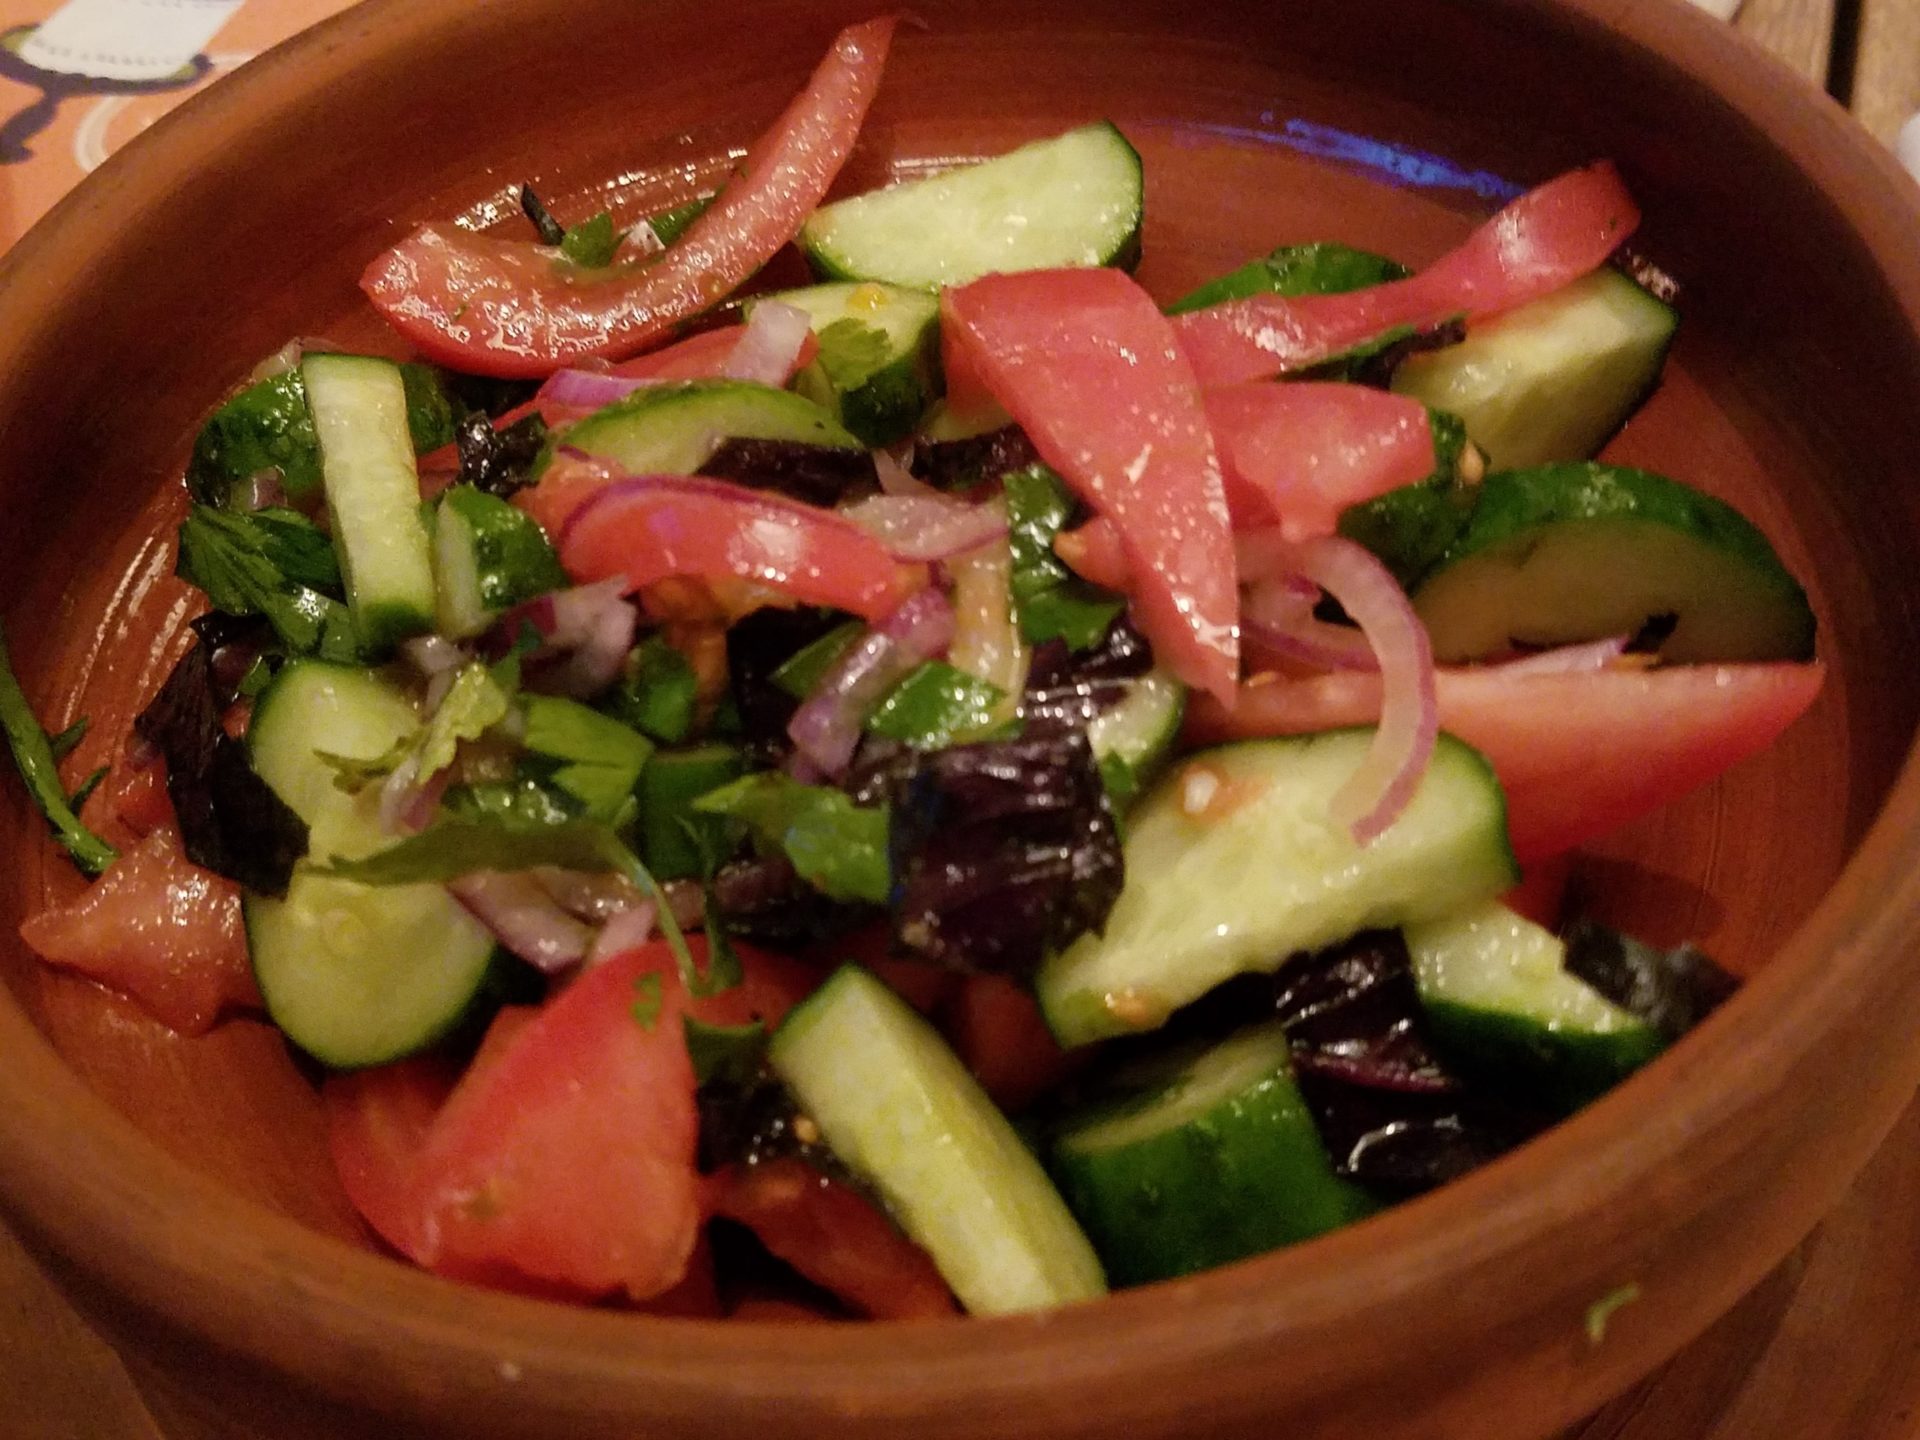 a bowl of salad with tomatoes and cucumbers